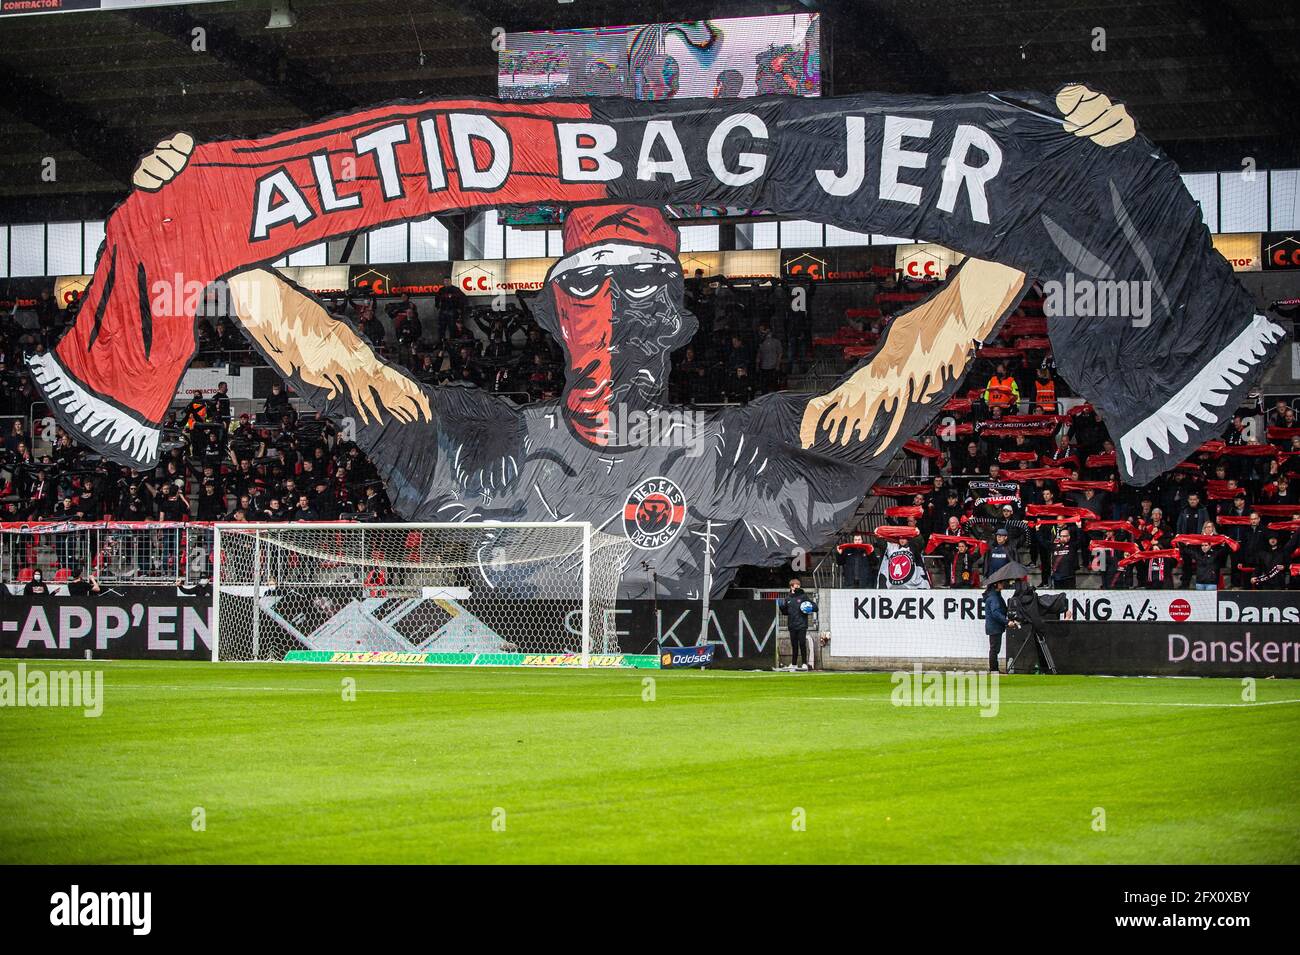 Fc midtjylland fans hi-res photography and Alamy